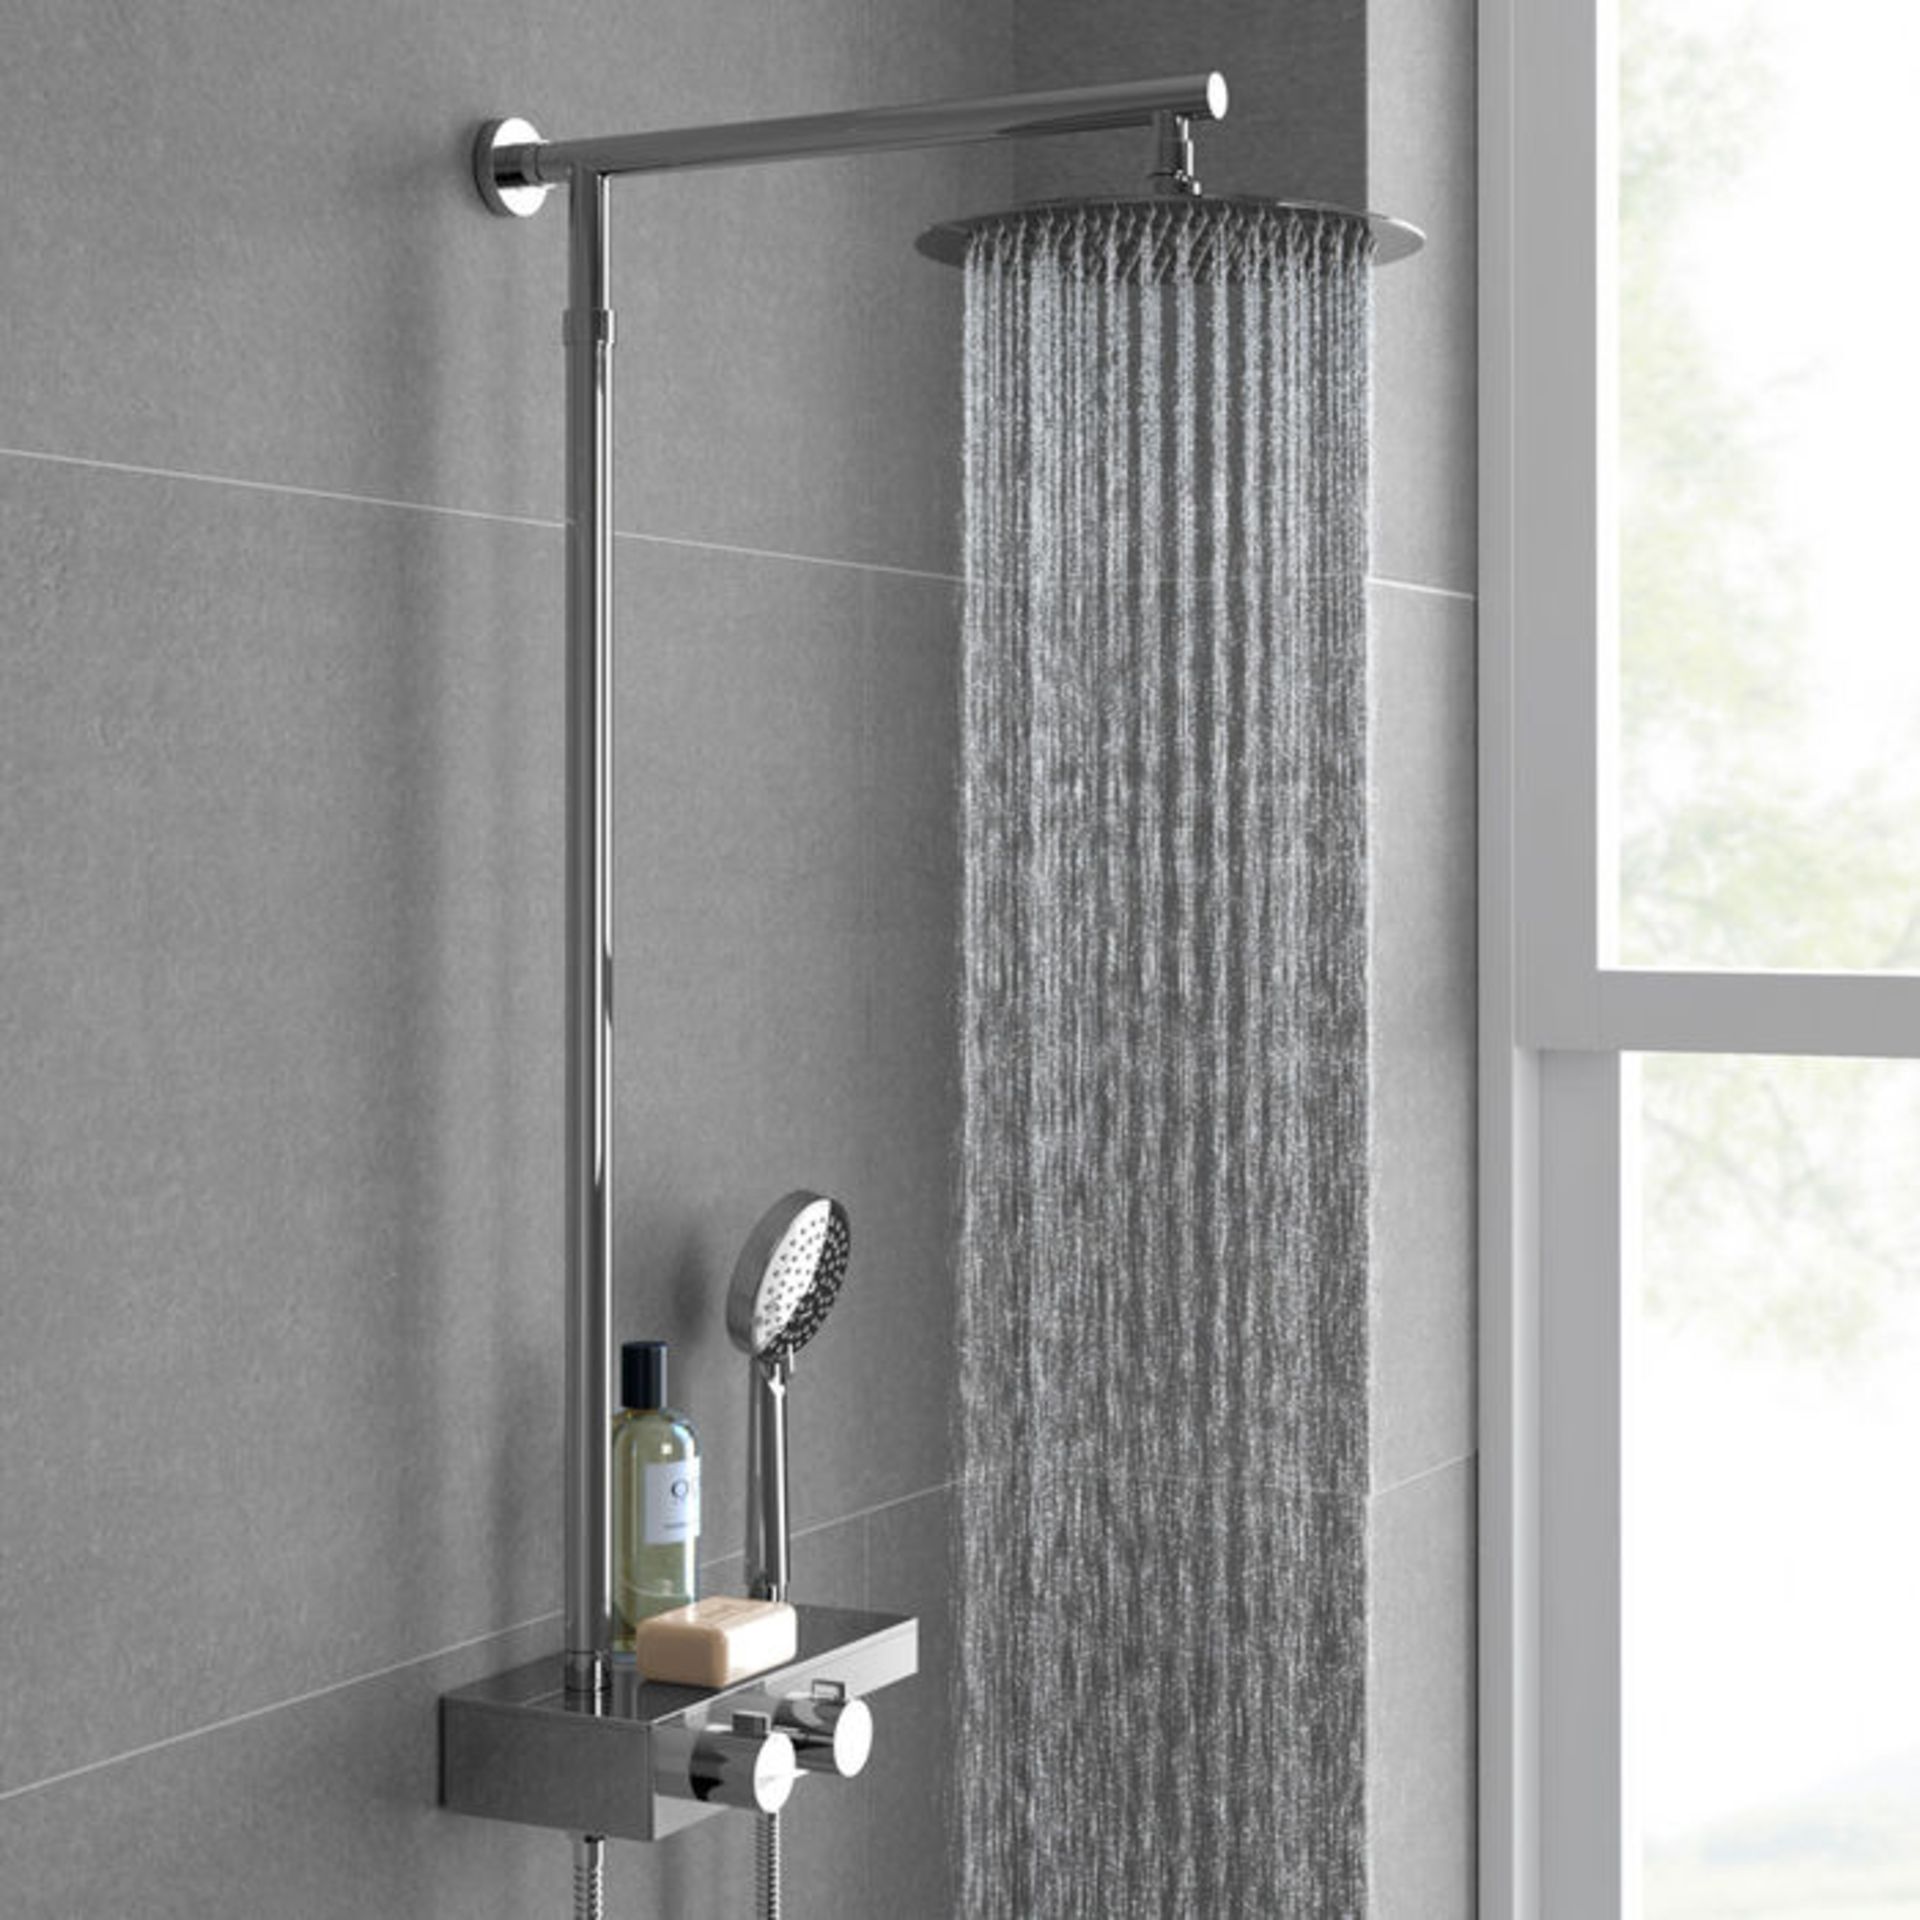 (TS134) Round Exposed Thermostatic Mixer Shower Kit & Large Head. Cool to touch shower for